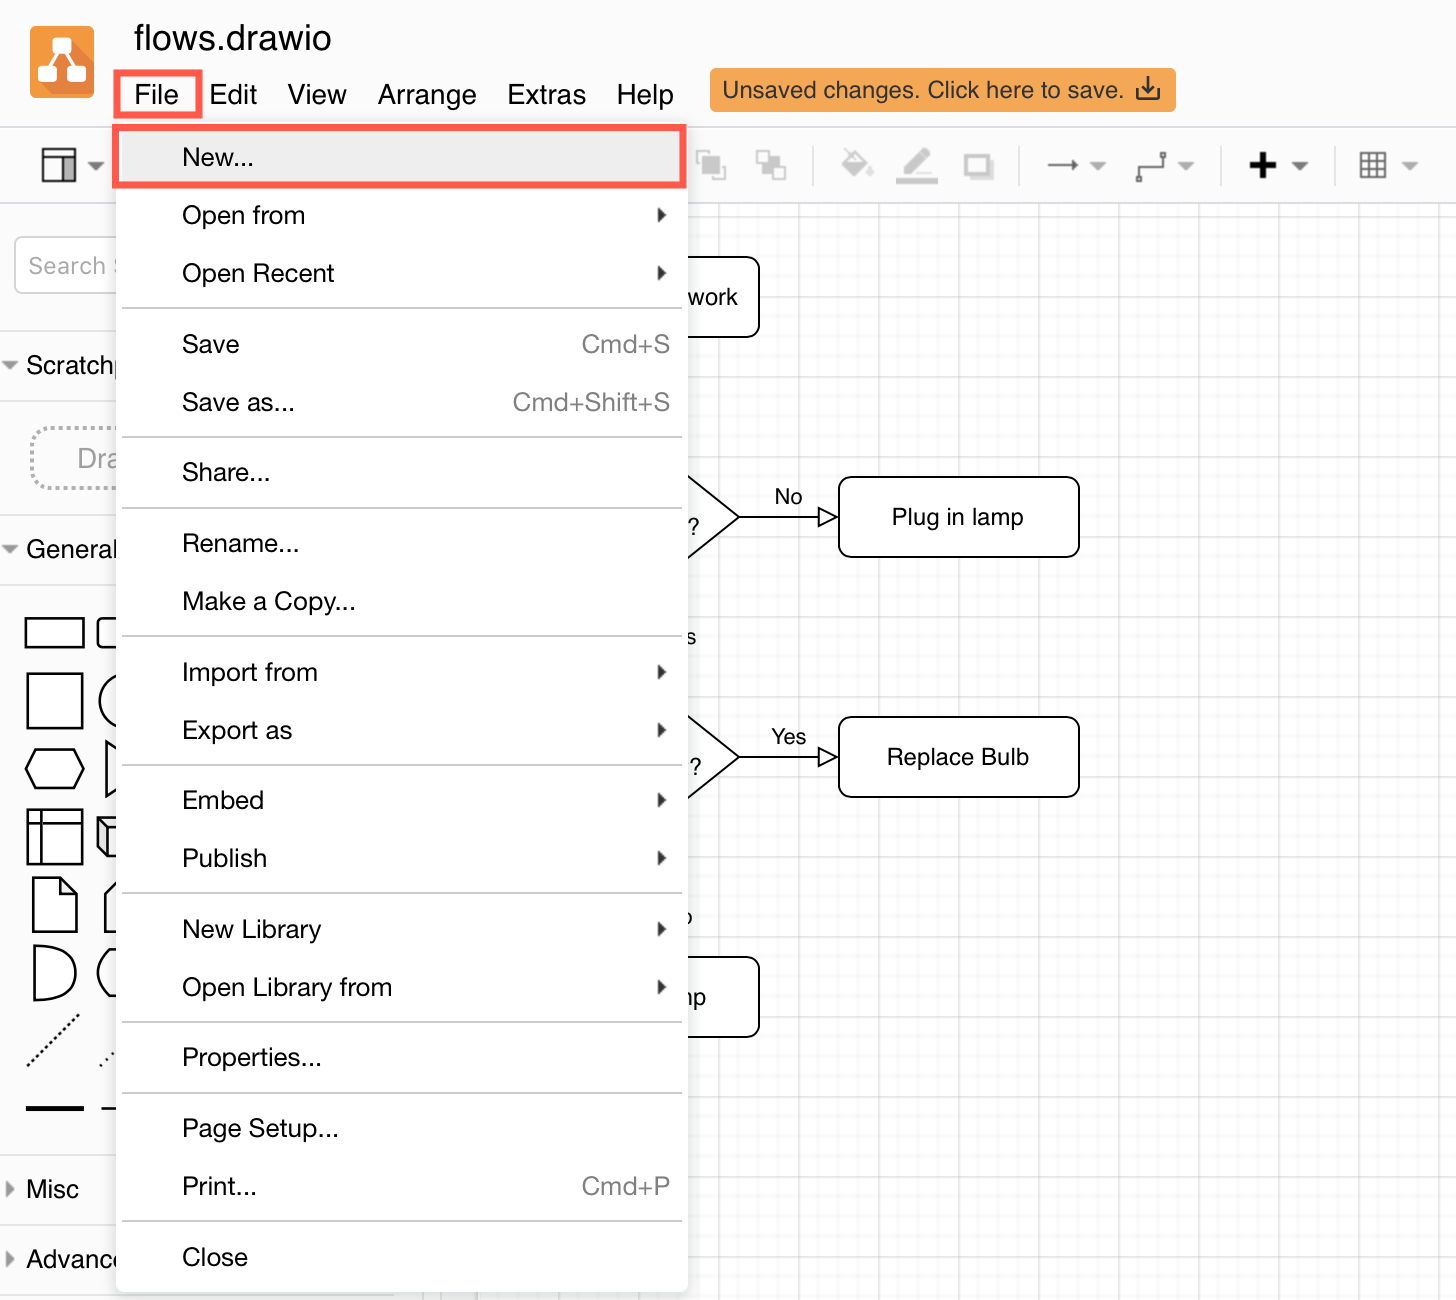 Select File > New within the draw.io editor to create a new diagram